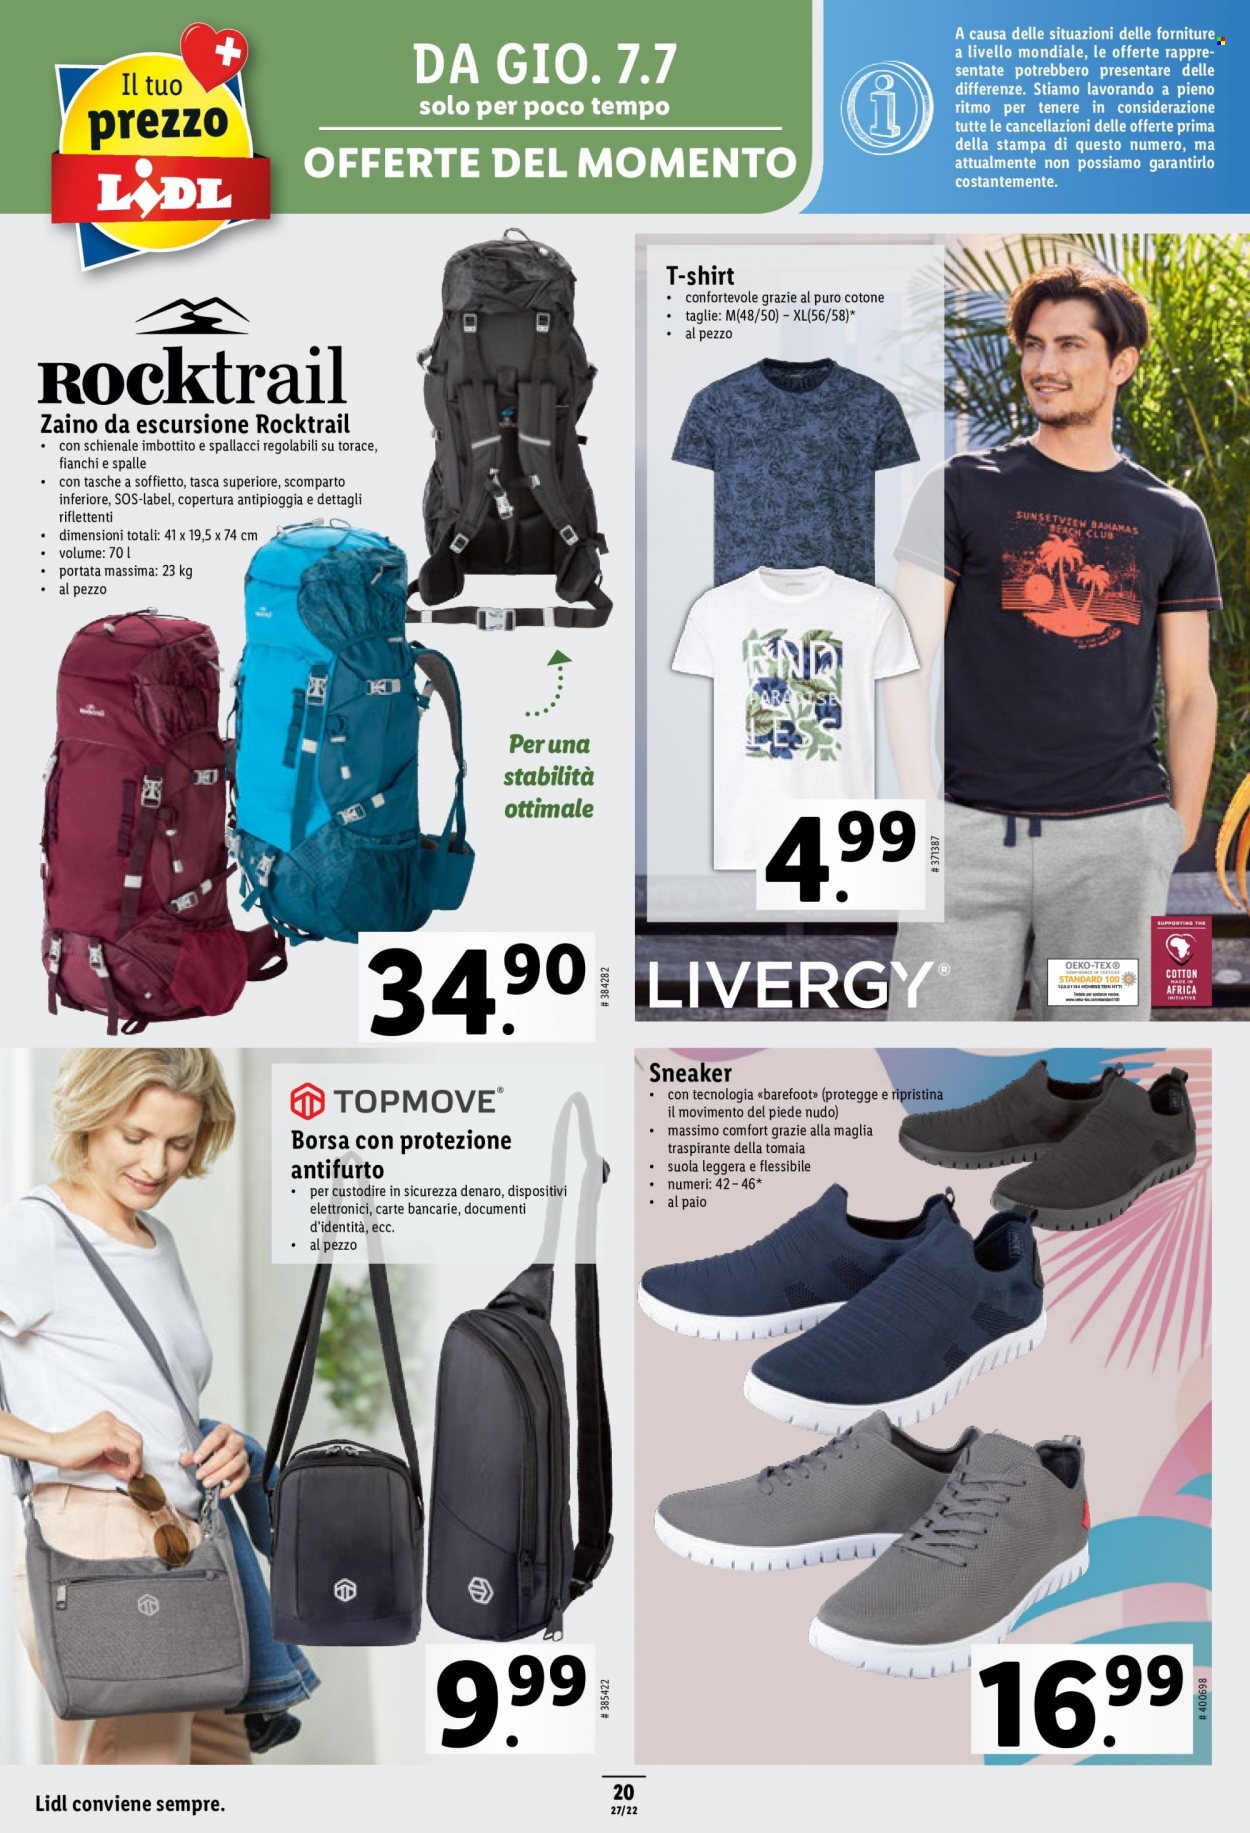 Catalogue Lidl - 7.7.2022 - 13.7.2022. Page 20.